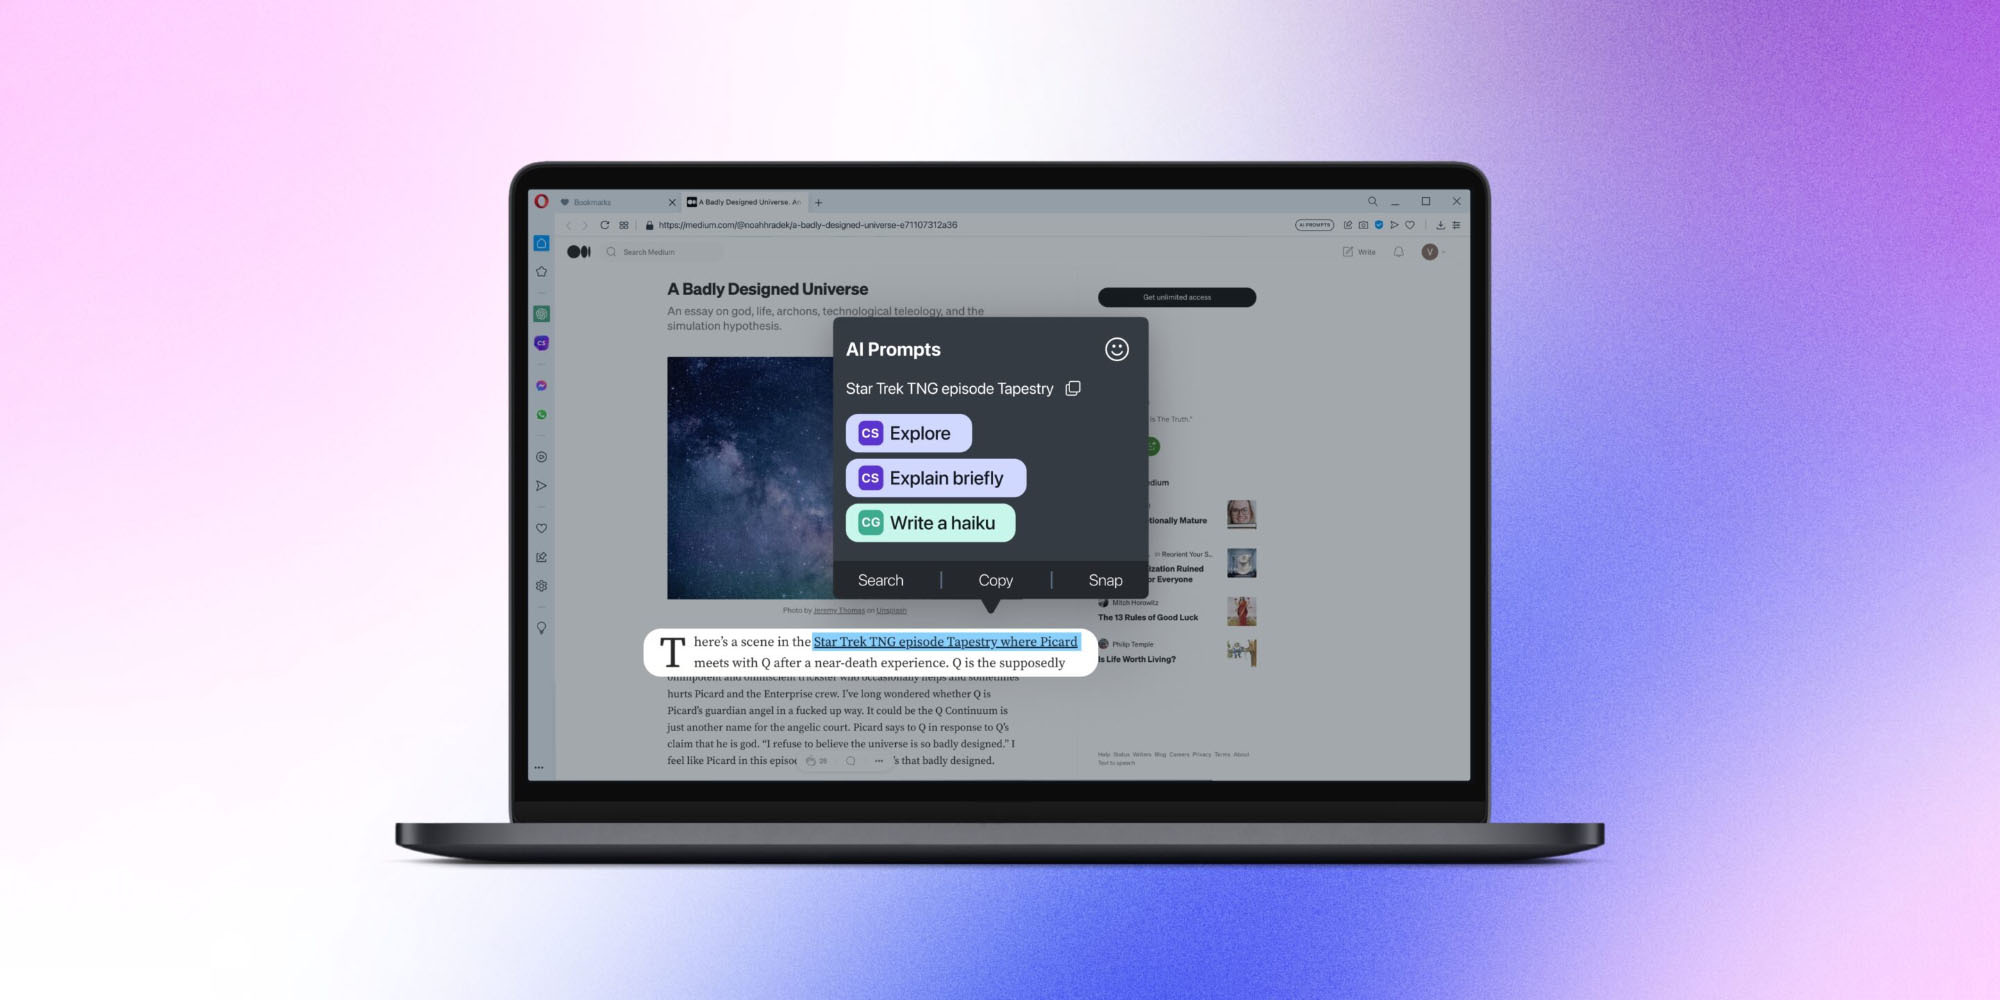 Opera browser gets ChatGPT with 'AI Prompts' and new sidebar on Mac -  9to5Mac